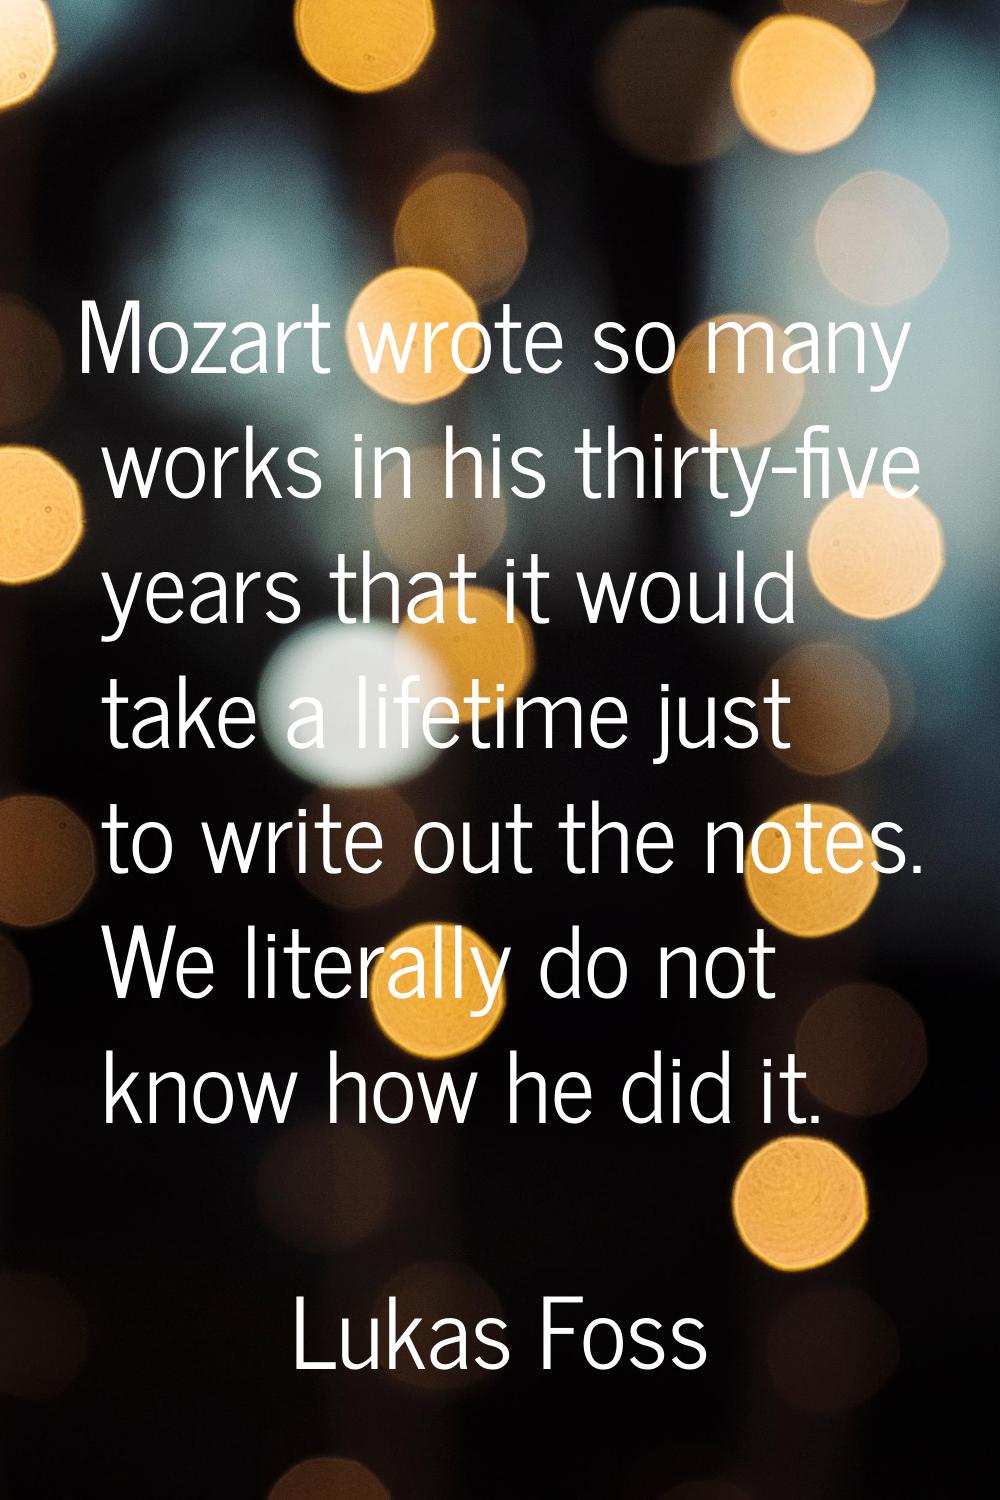 Mozart wrote so many works in his thirty-five years that it would take a lifetime just to write out